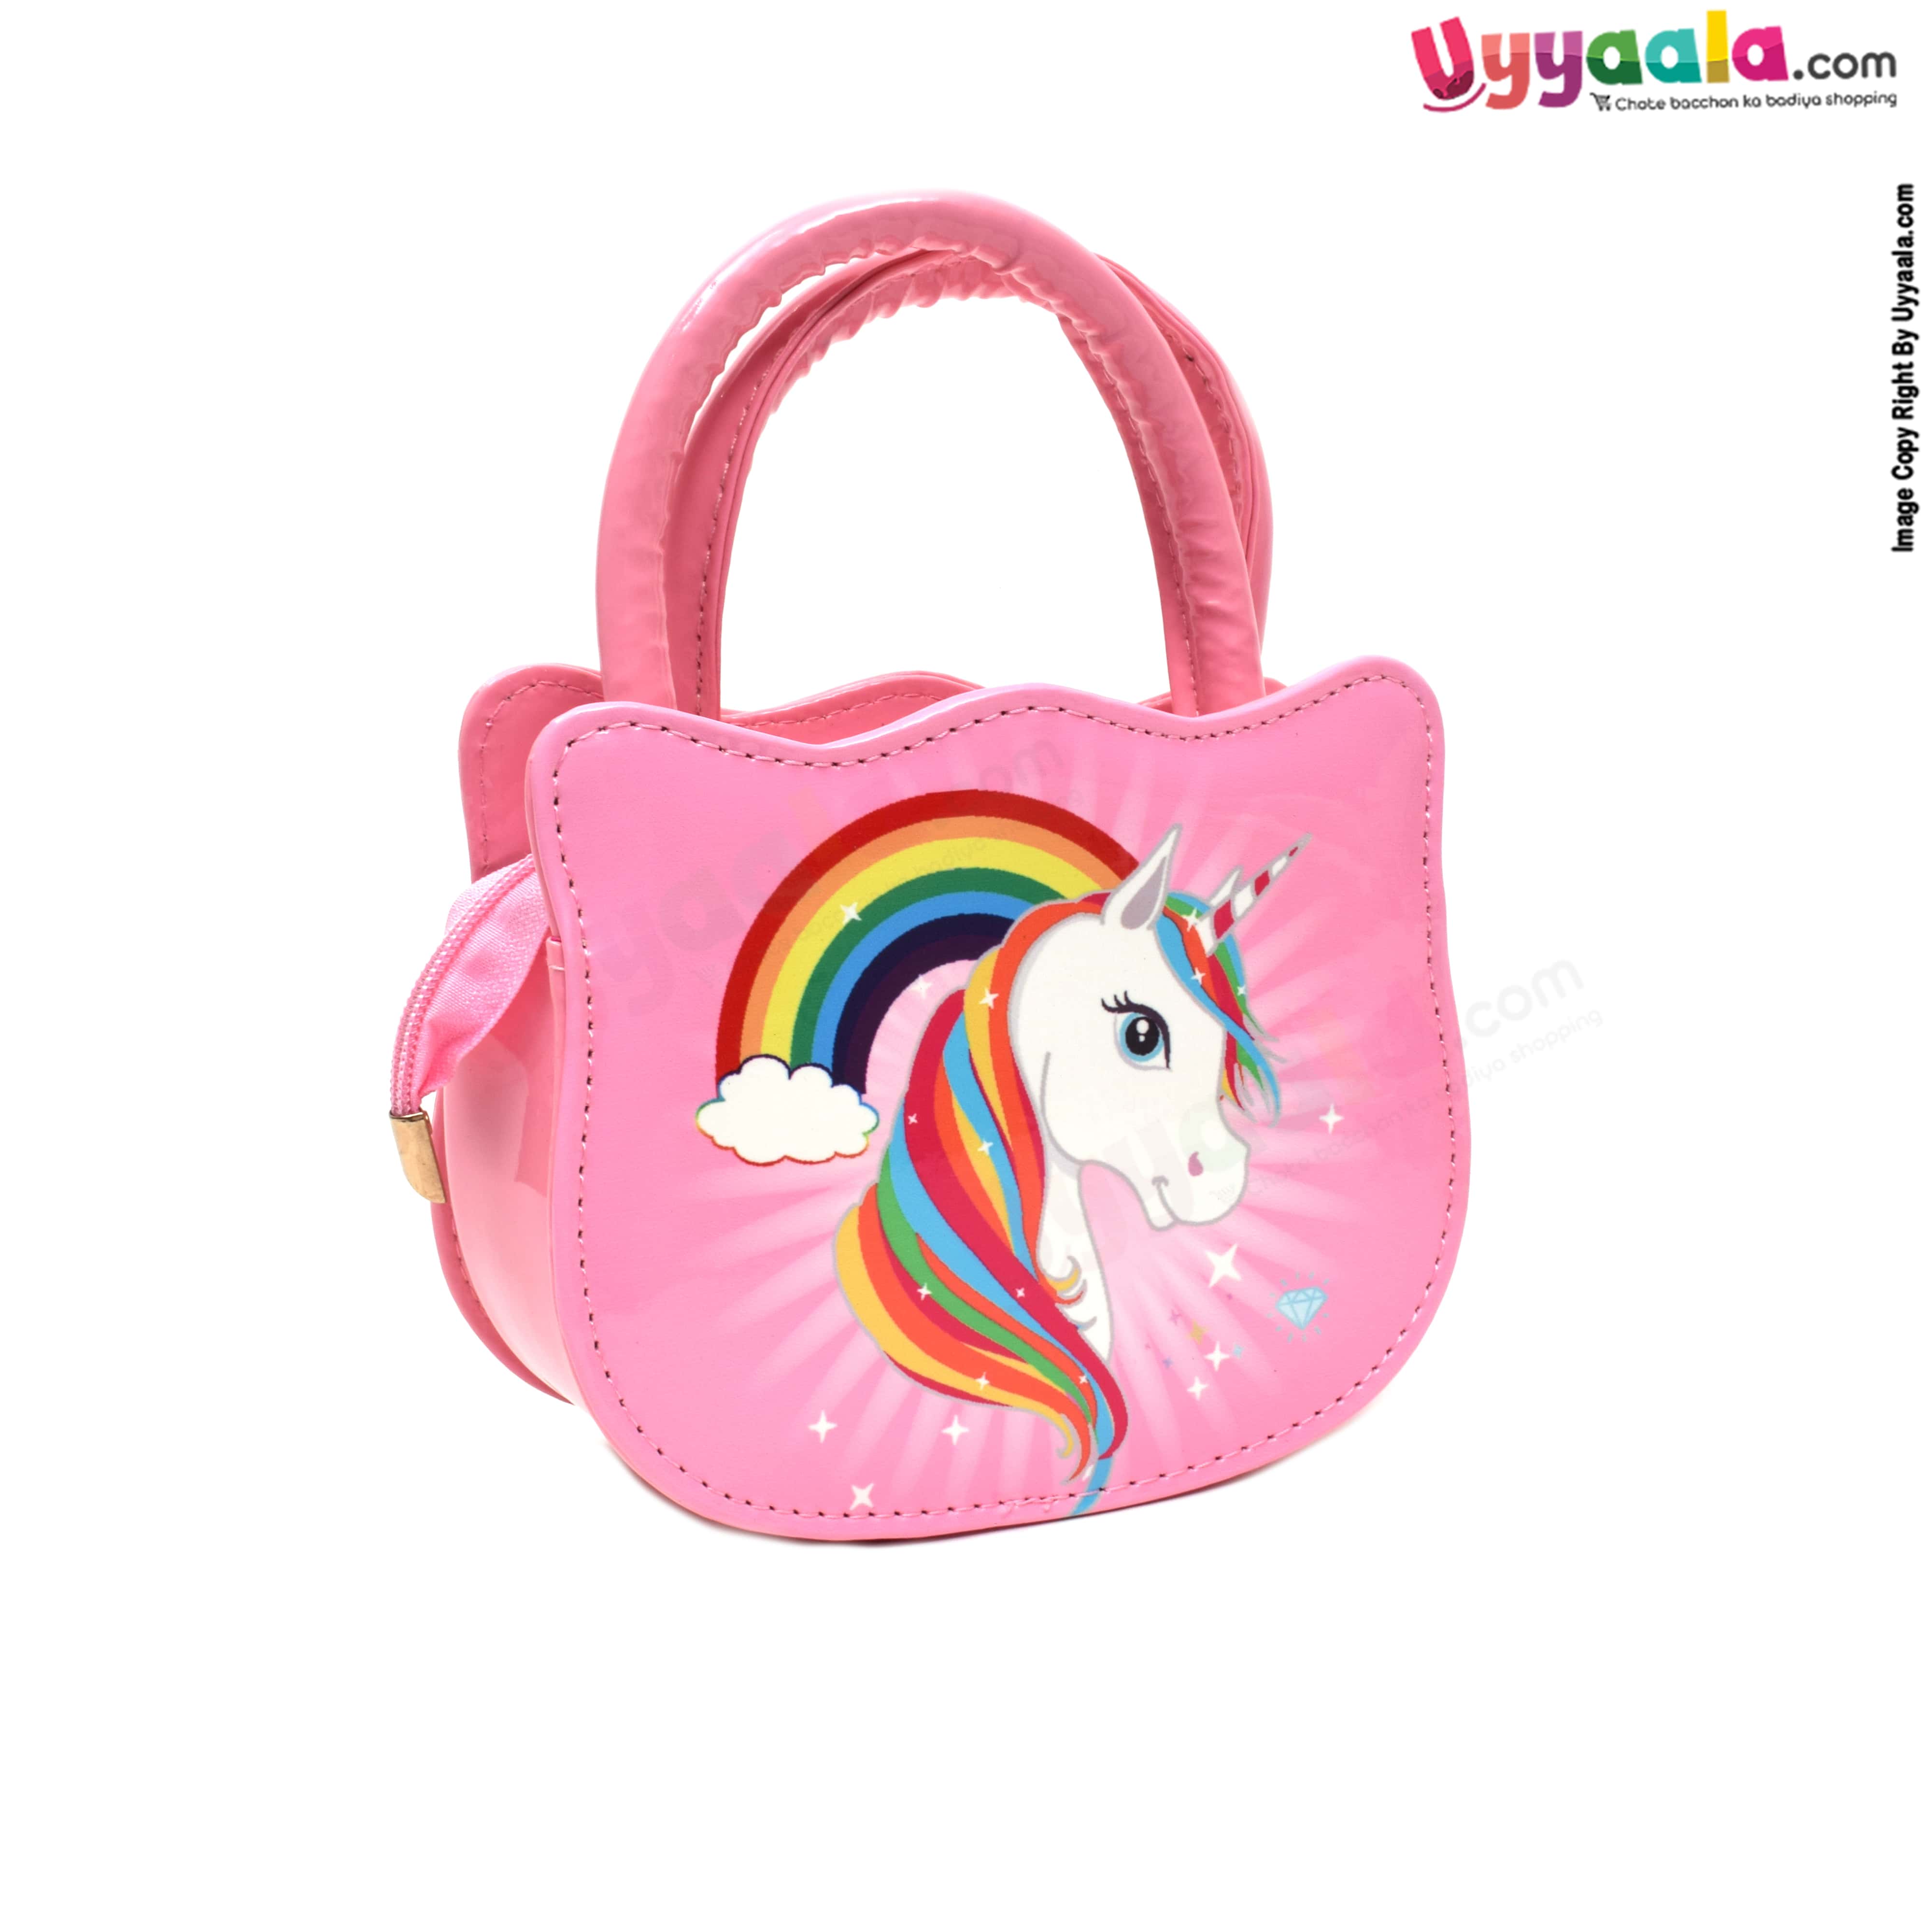 Party wear sling hand bag for kids (baby girl) with rainbow & unicorn print